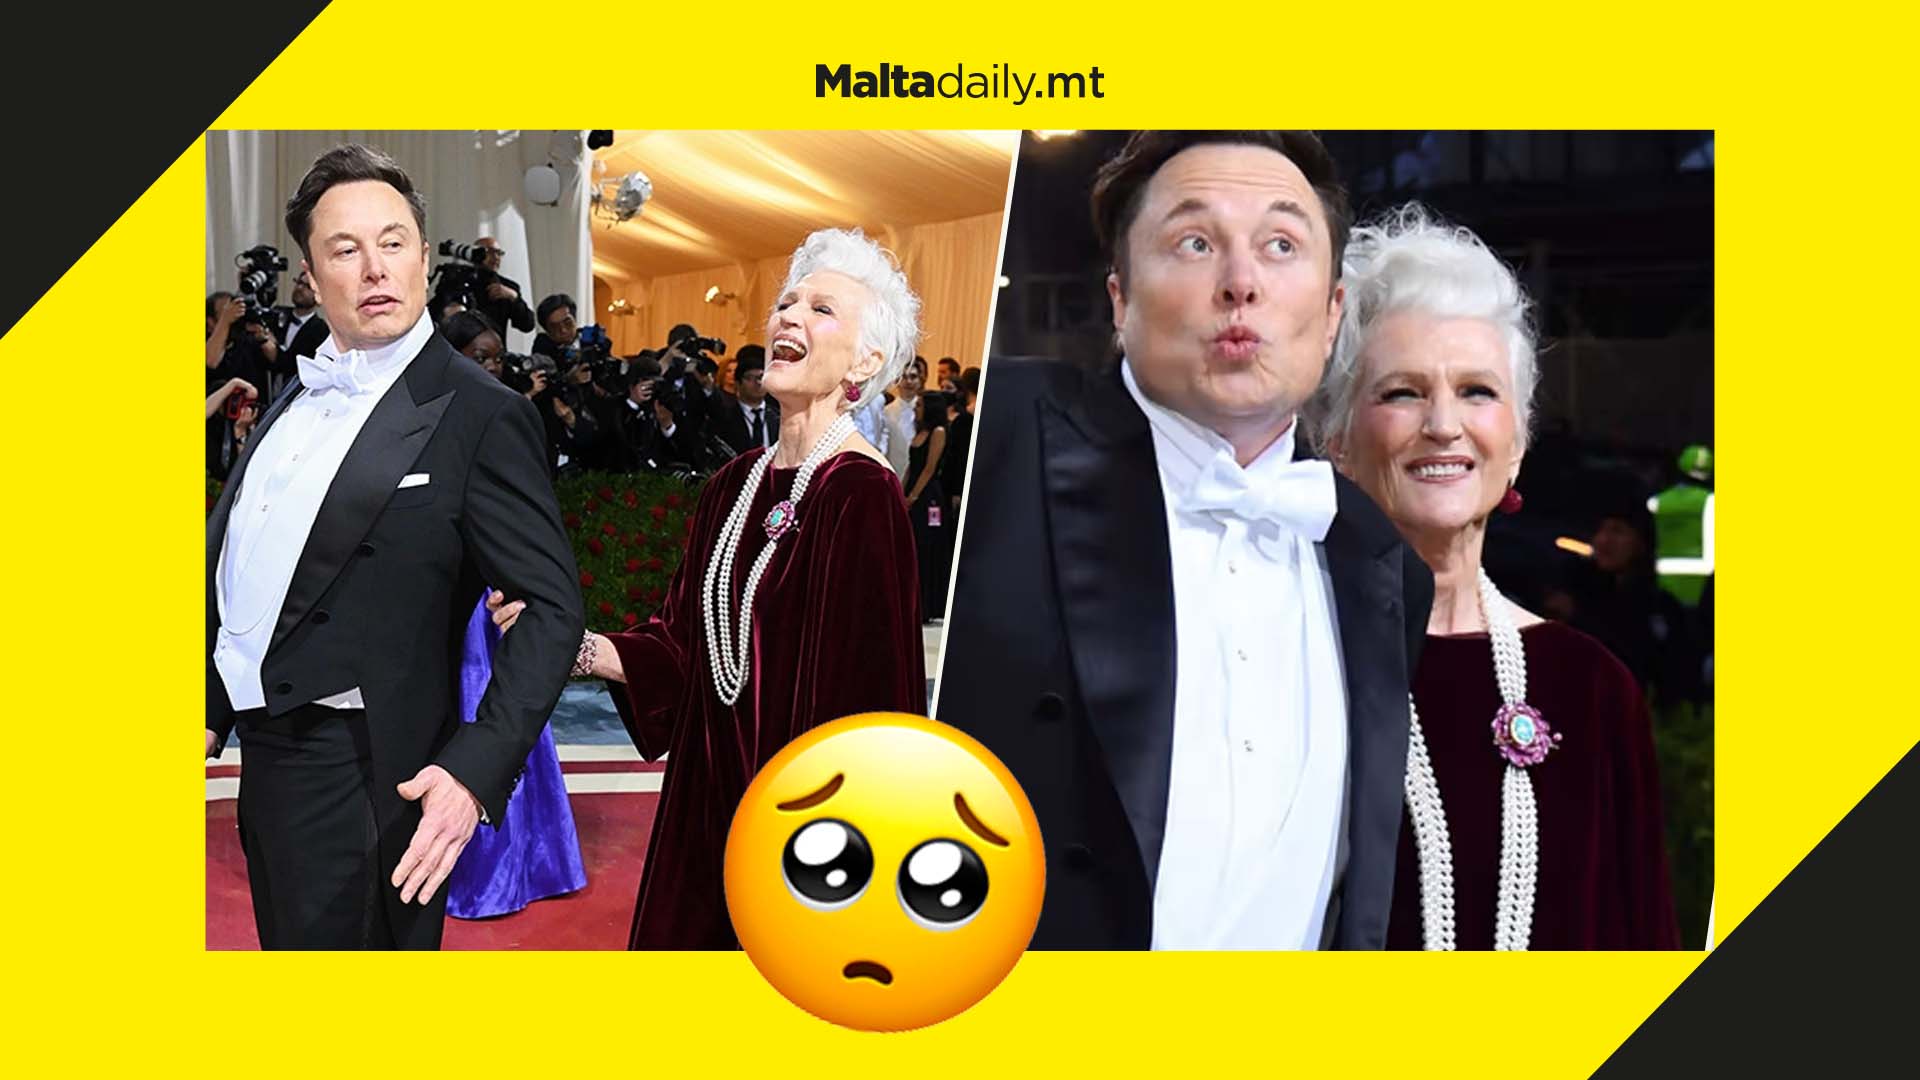 Elon Musk takes his supermodel mum, Maye, as a date to the Met Gala